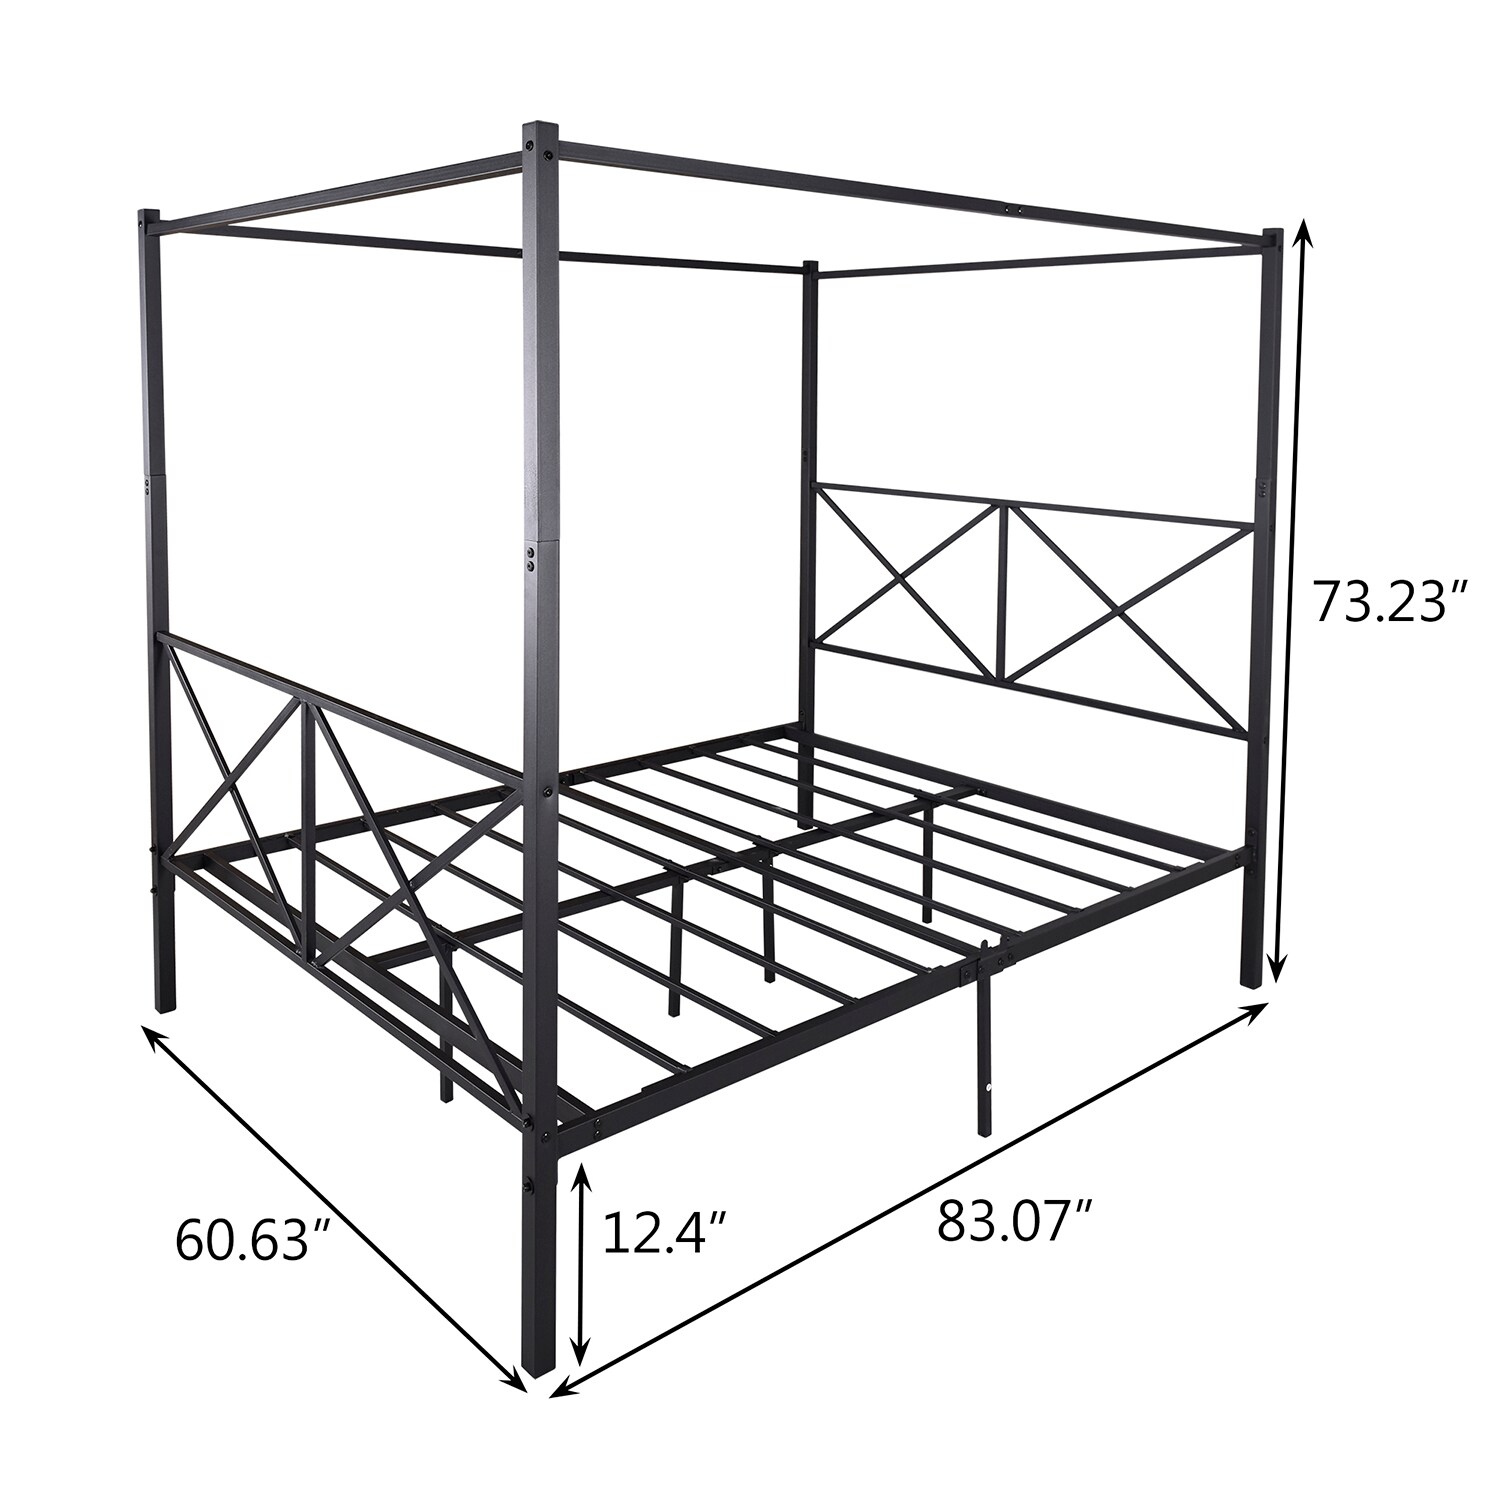 GZMR Queen Canopy Bed Frame Black Queen Metal Canopy Bed with Storage ...